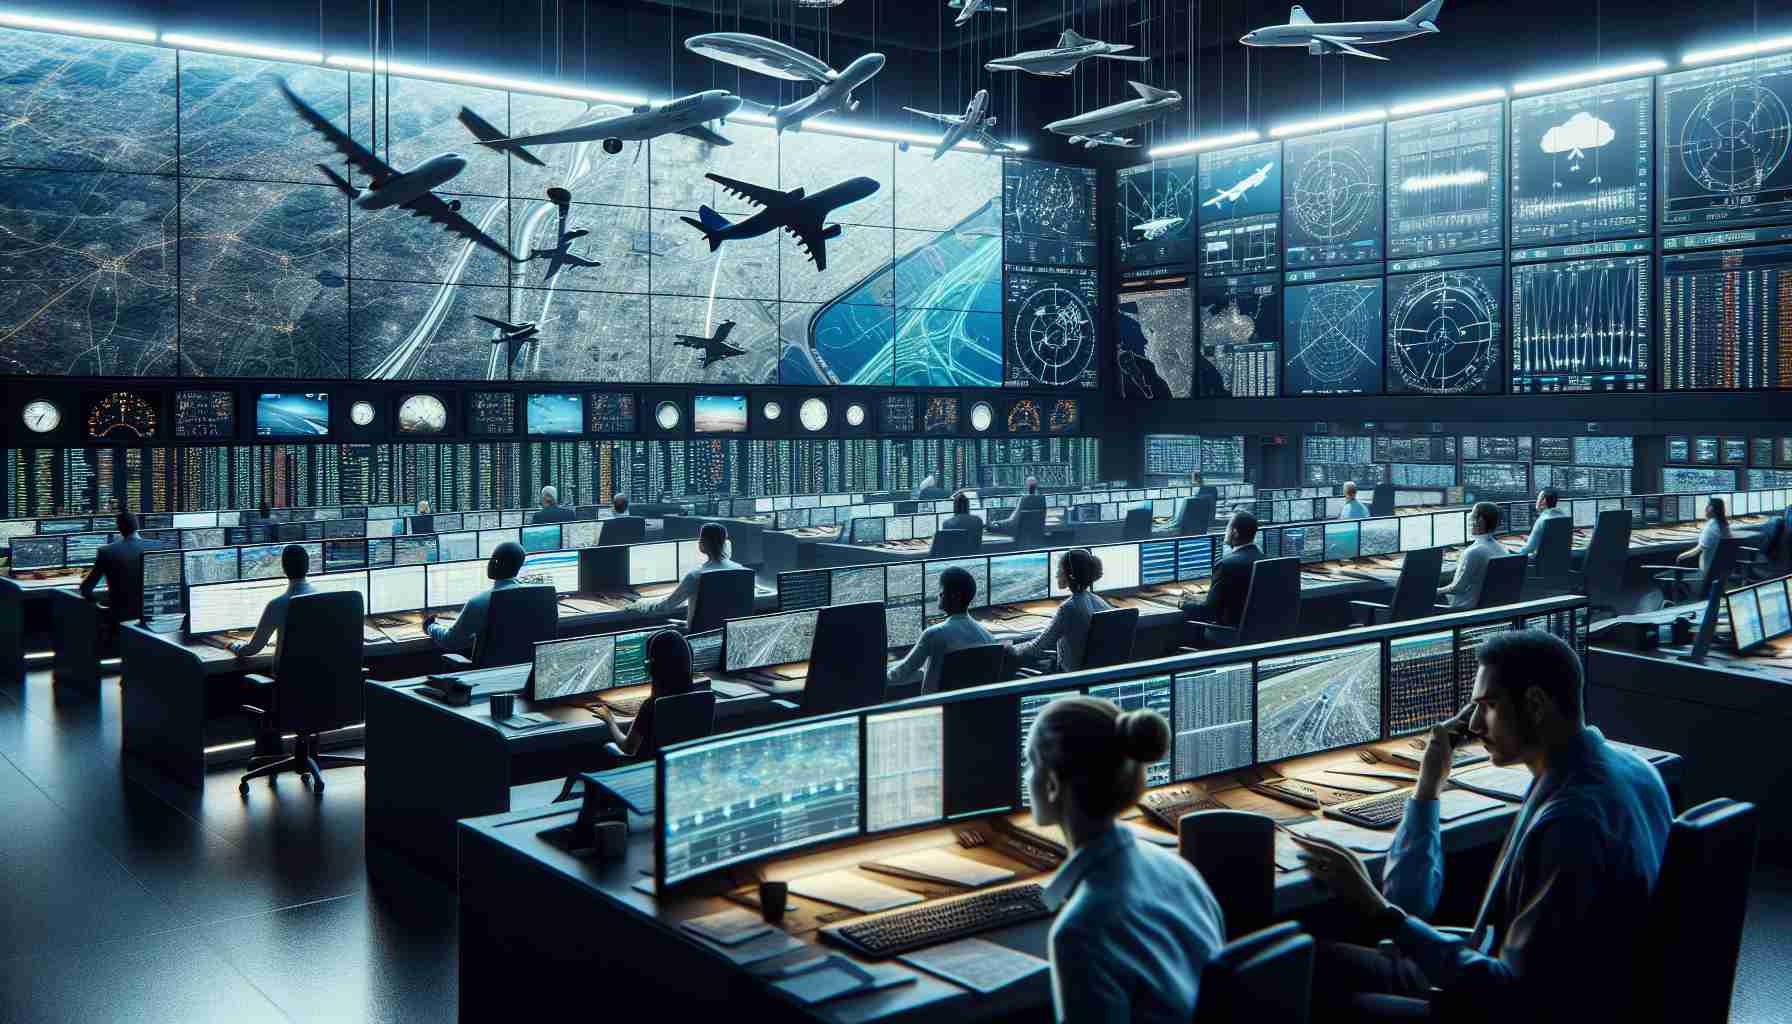 High definition, realistic image of an air traffic control room filled with state-of-the-art equipment. Show multiple monitors portraying radar signals, flight paths, and weather updates in crisp detail. A diverse group of staff is present: a Caucasian woman coordinating flights, a Black man reviewing radar screens, and a Hispanic man handling communication with pilots. They are all intensely focused, managing the ever-increasing demand of air traffic seamlessly. Numerous plane models hanging from the ceiling symbolize the variety of air traffic they handle. Picture the tension and concentration in the room.